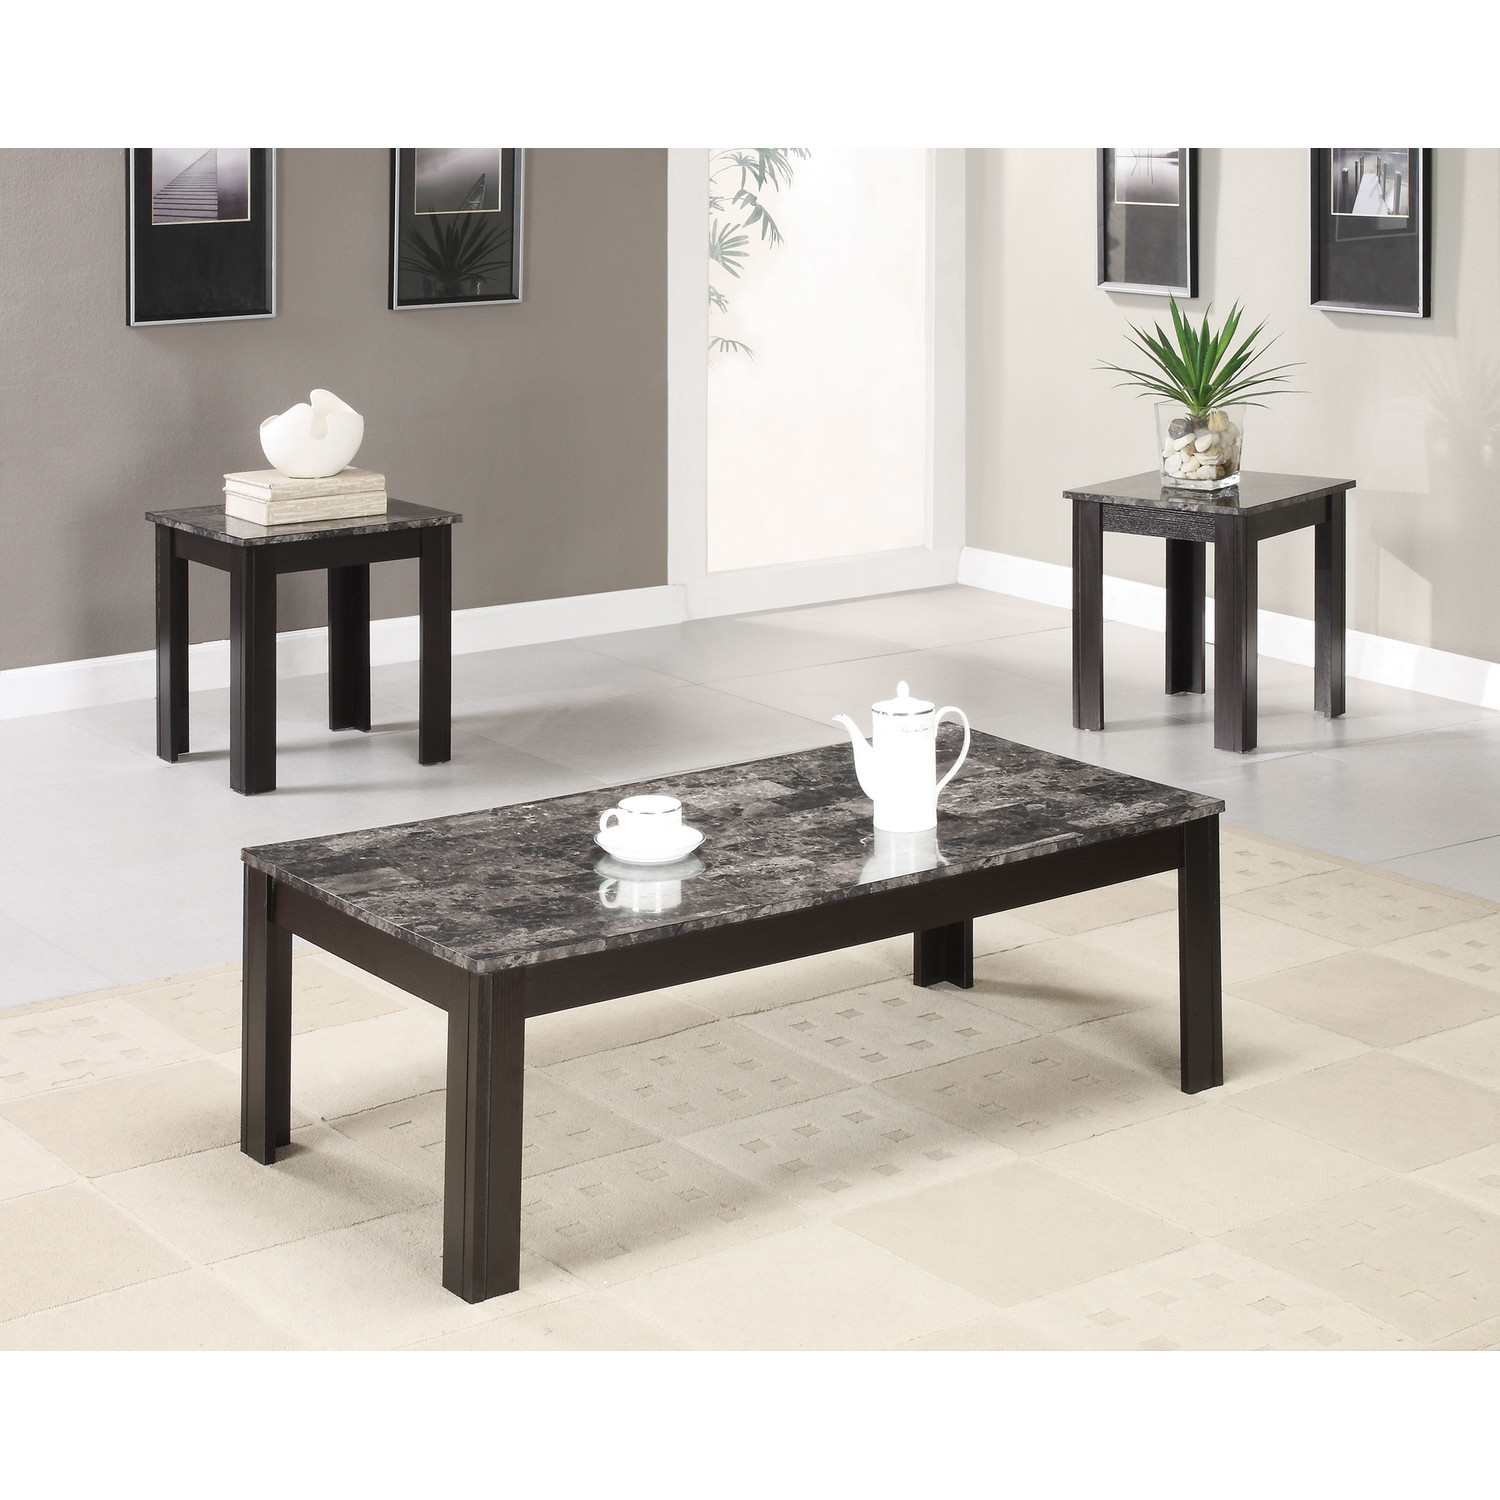 cool faux granite dining table set for white and real room sets top tops designs chairs square base custom round black bases only models piece accent chair side full size gray